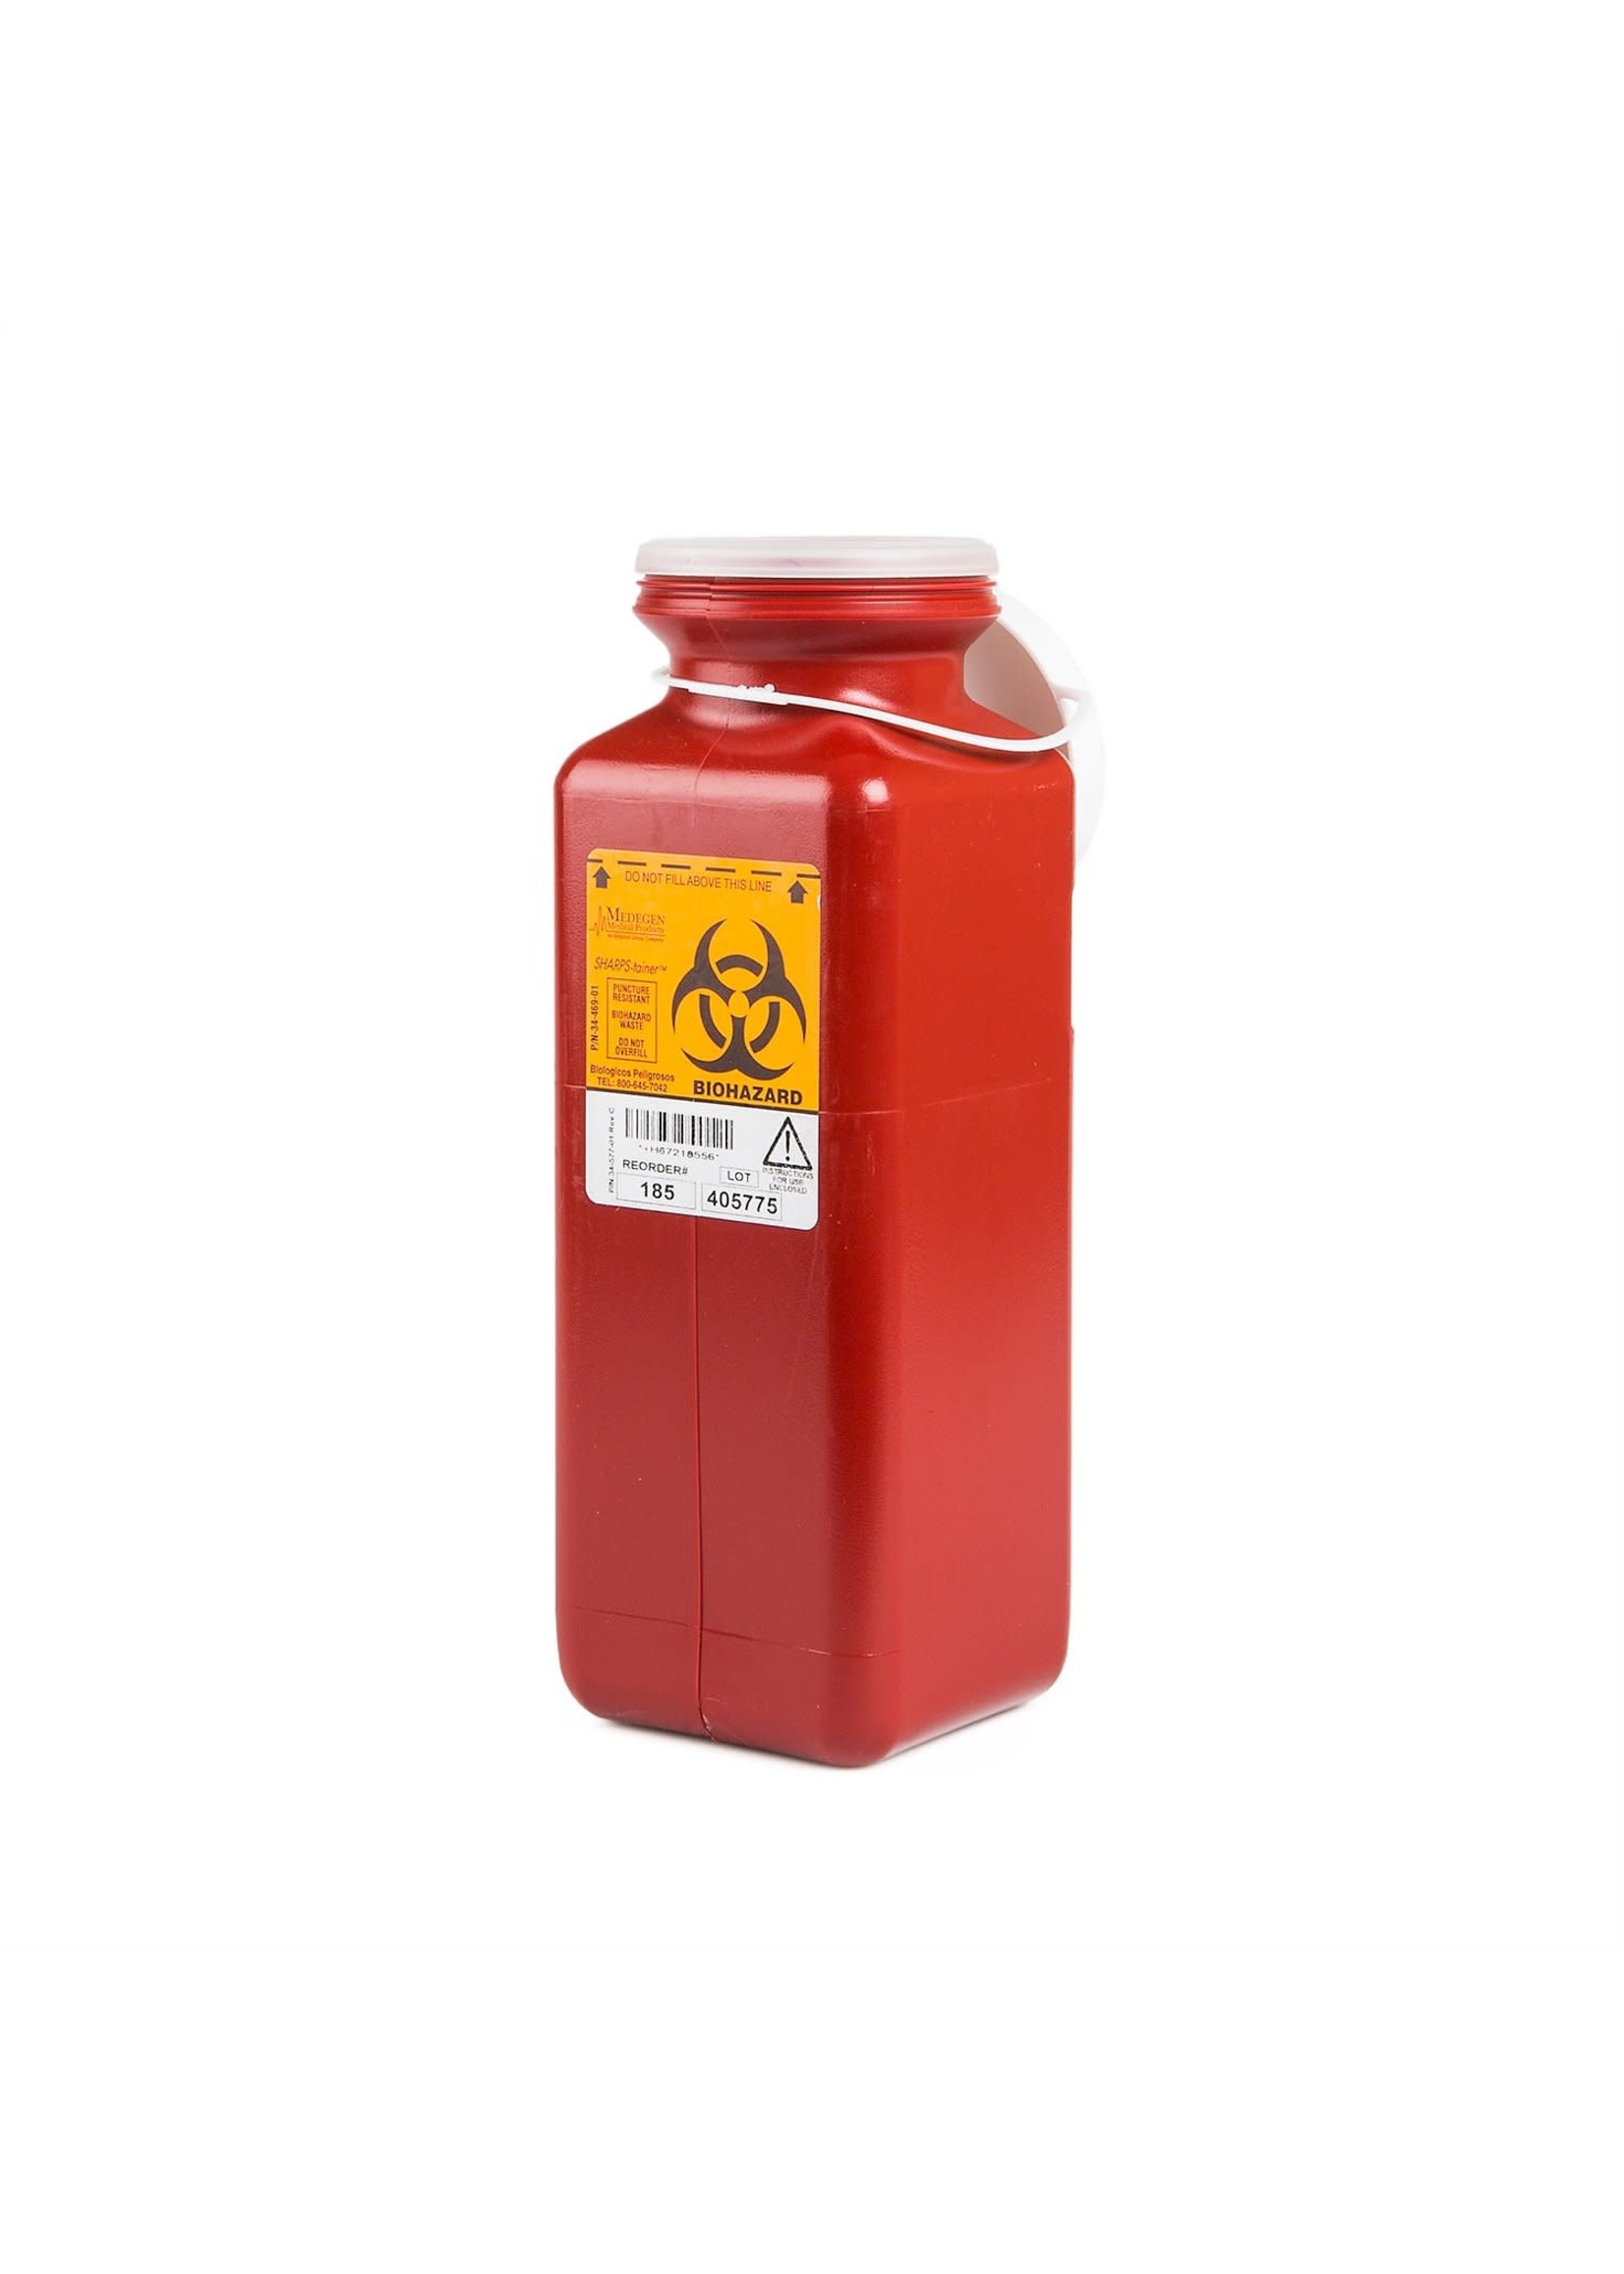 Sharps Container 1.7 qt, Tall Red‚ (185)